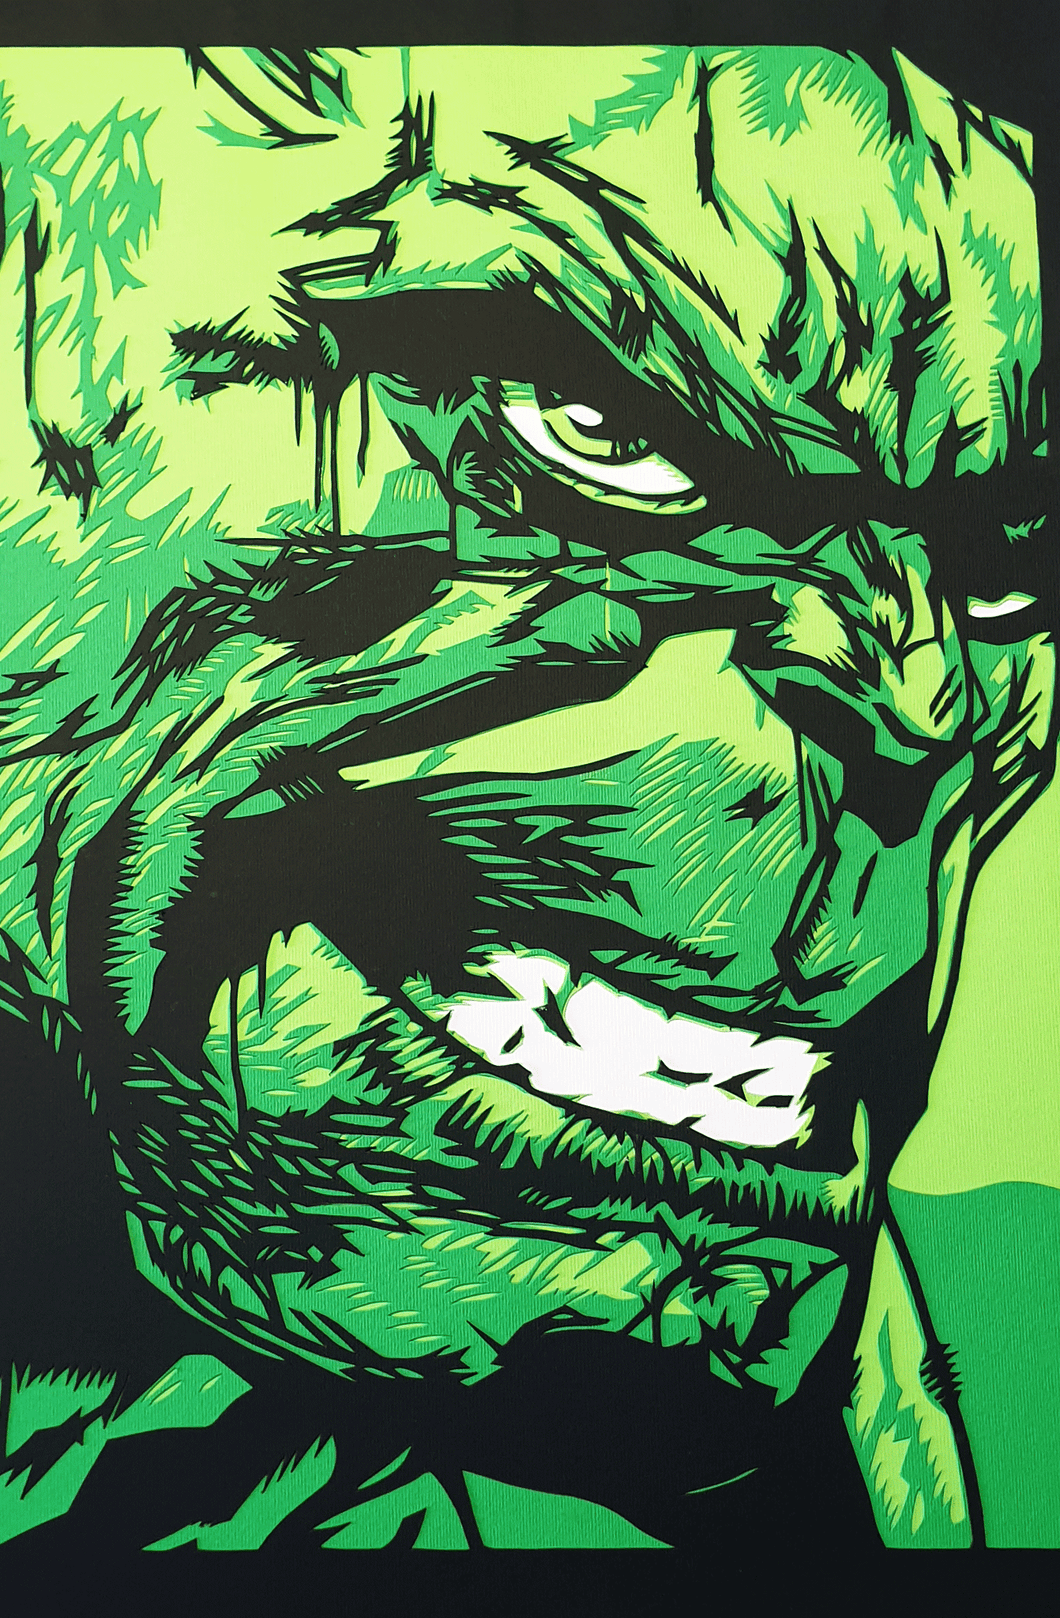 Hulk Smash by Rick Sharif - FRAMED [A3 Size (297 x 420 mm) (11.7 x 16.5 in) in a FRAME]